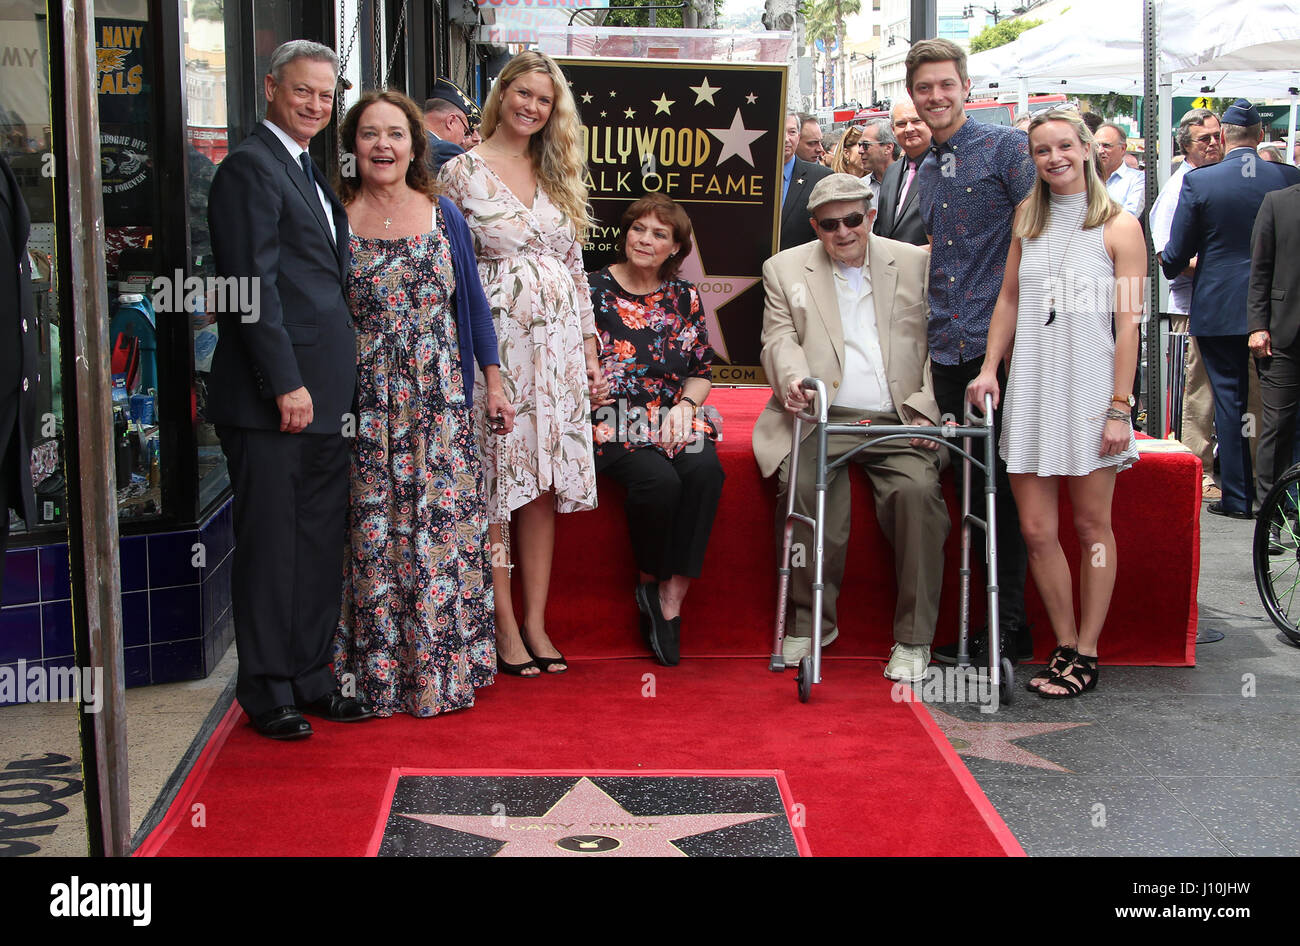 Hollywood, Ca. 17th Apr, 2017. Gary Sinise, Moira Sinise and family, At Gary Sinise Honored With Star On The Hollywood Walk Of Fame At The Hollywood Walk Of Fame In California on April 17, 2017. Credit: Fs/Media Punch/Alamy Live News Stock Photo